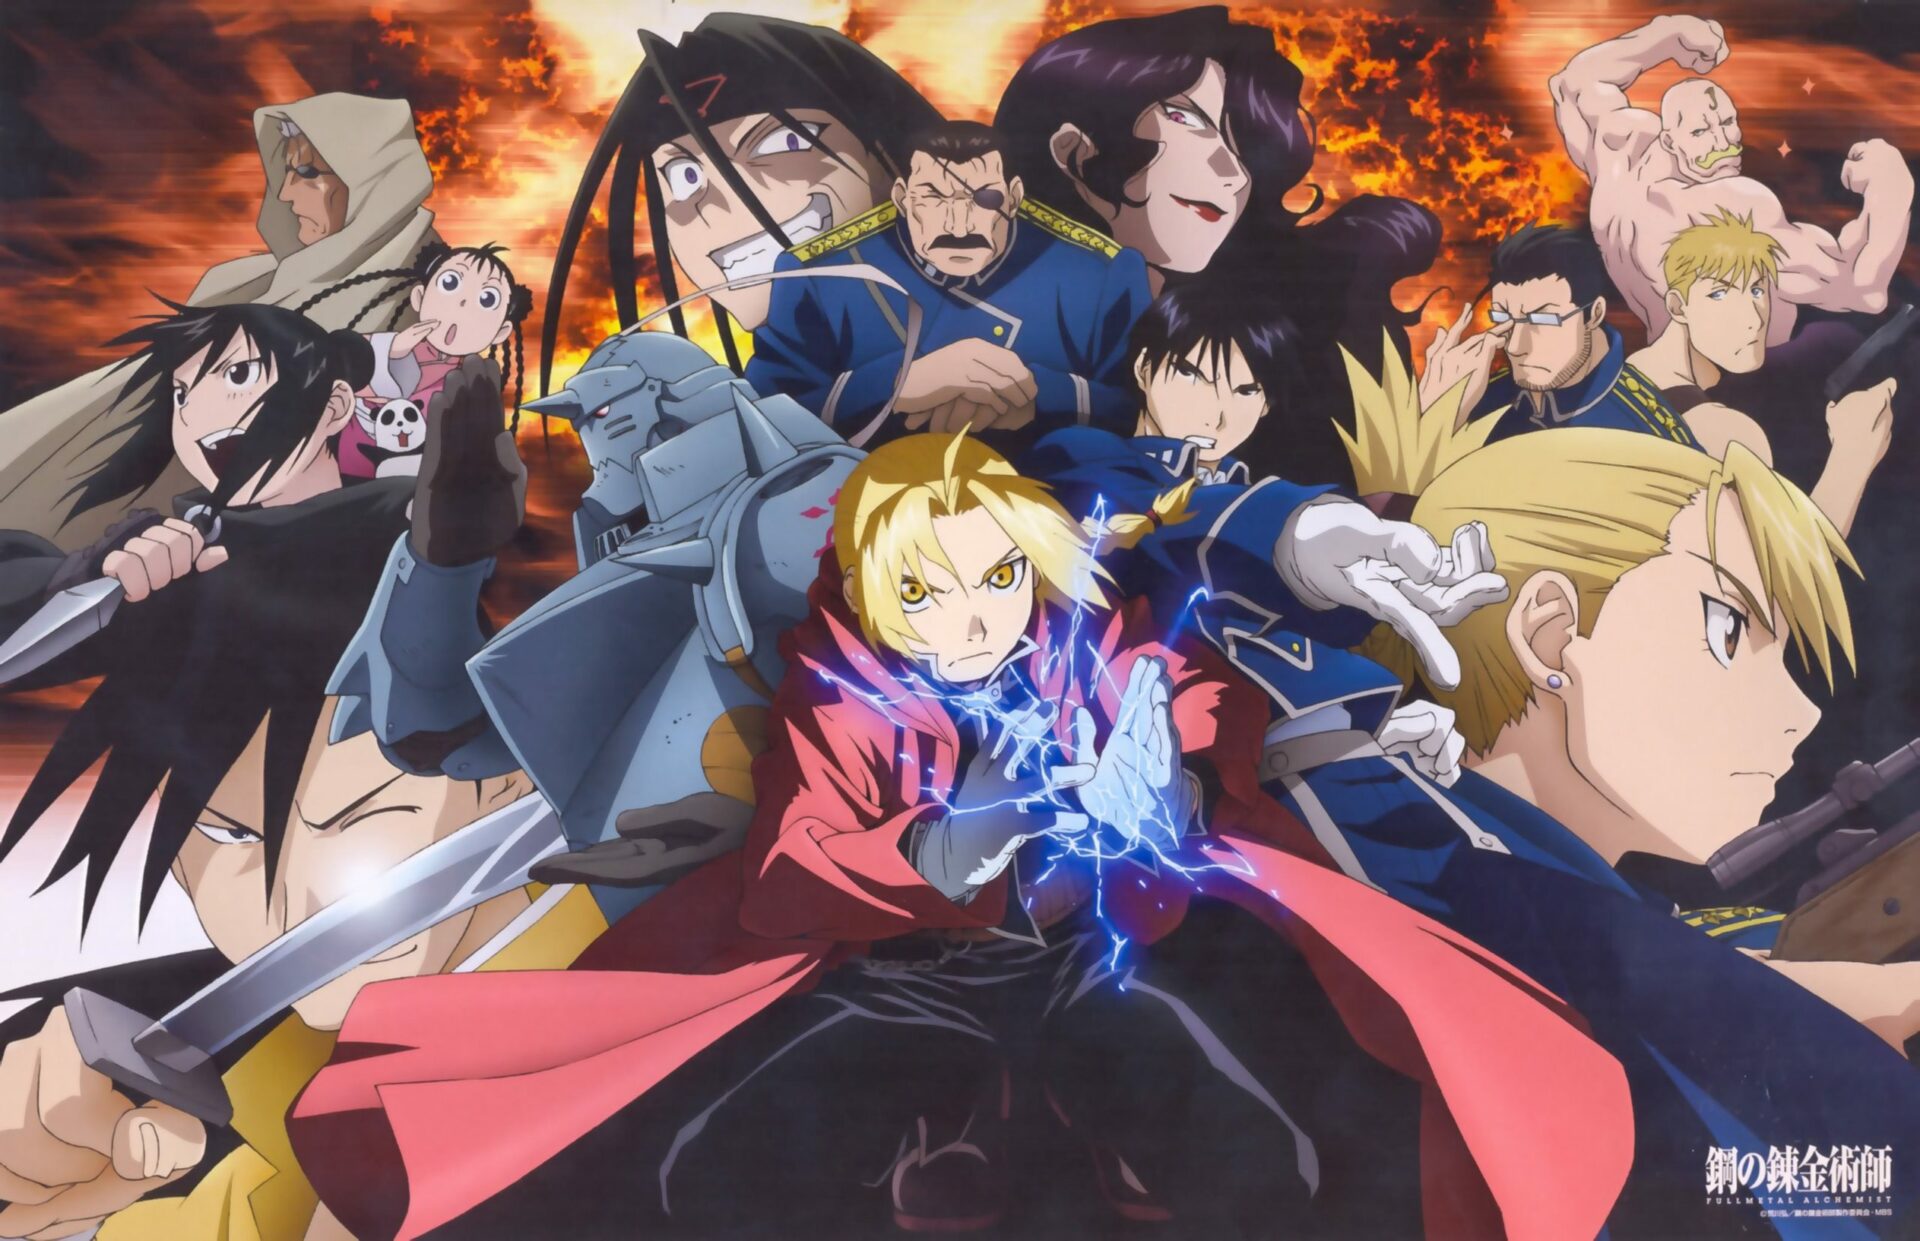 Top 20 Dubbed Anime On Crunchyroll in 2020